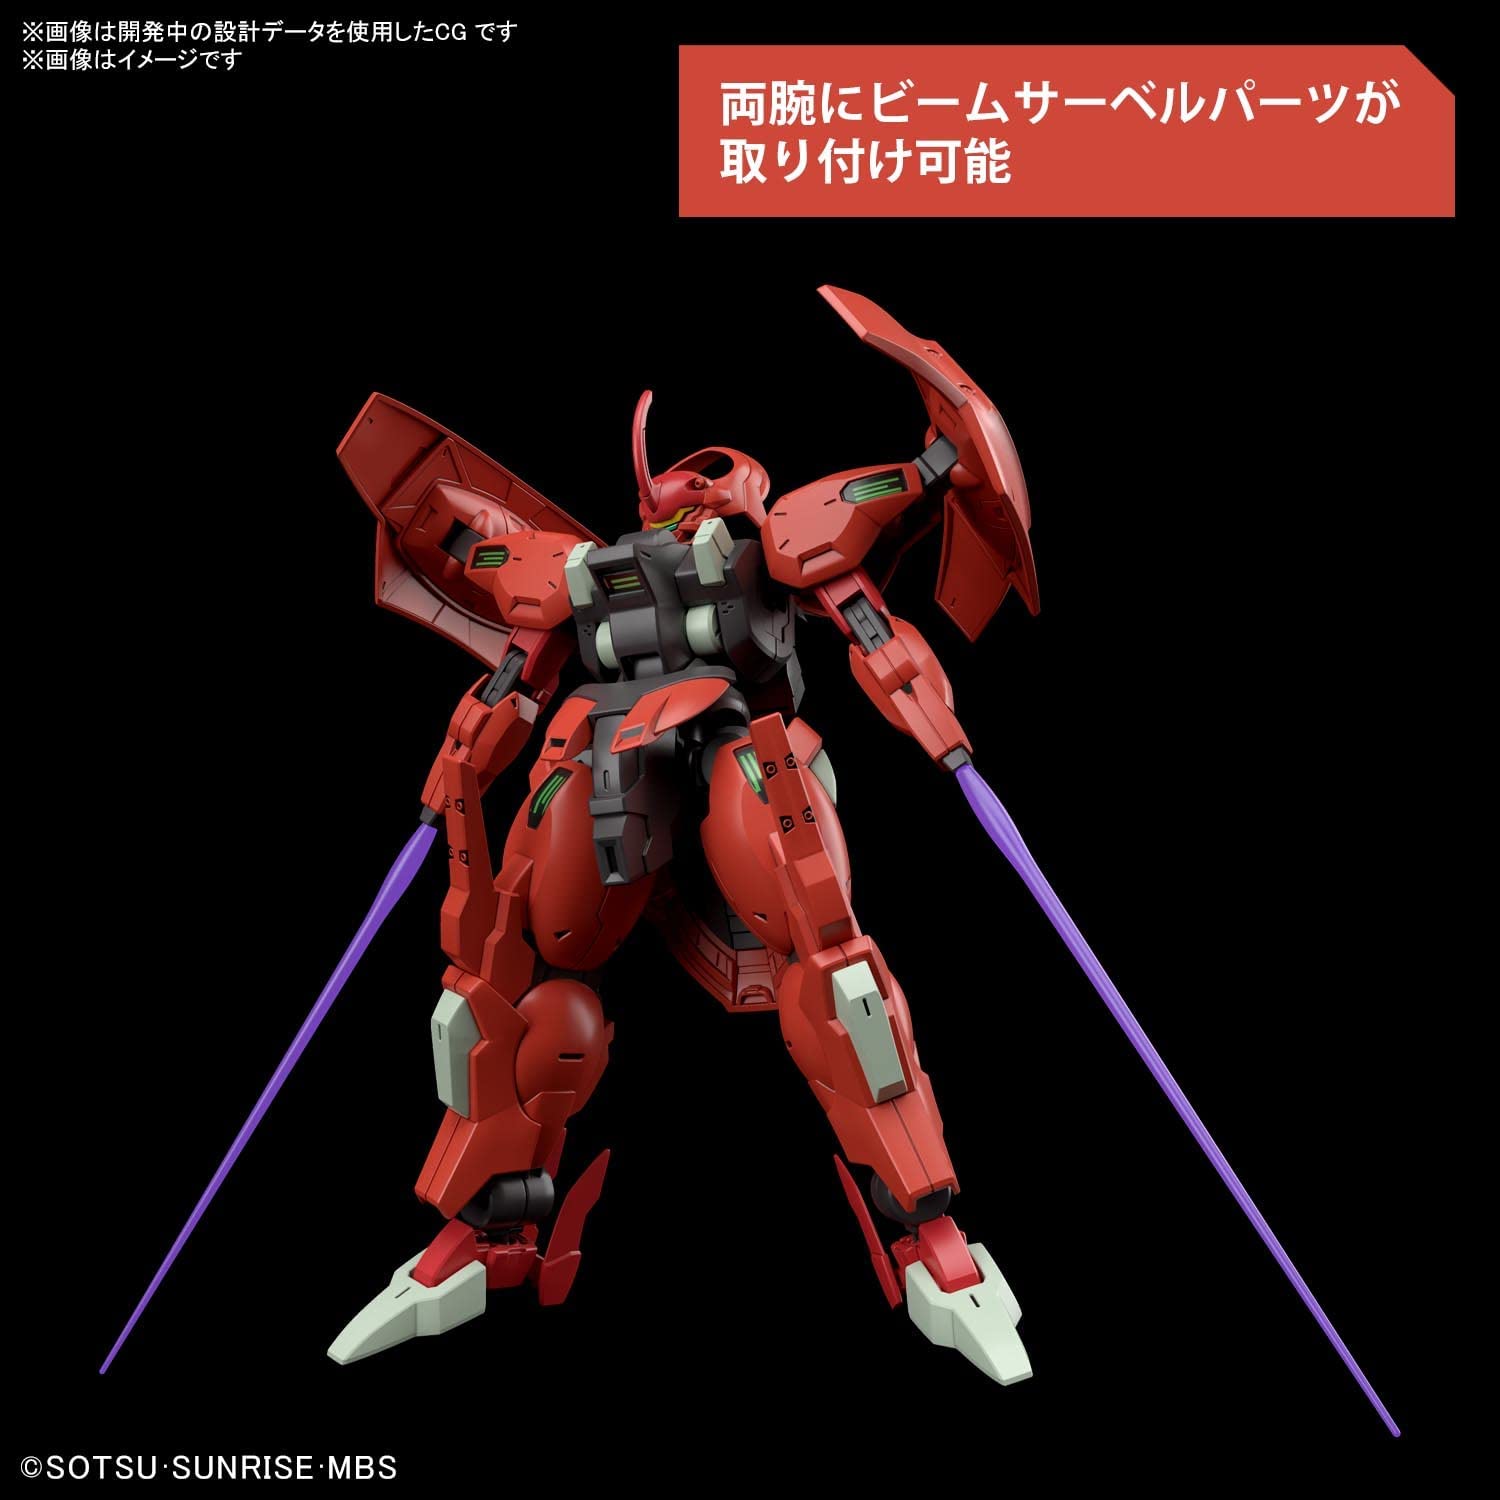 HG Mobile Suit Gundam: Witch of Mercury Daryl Barde 1/144 Scale